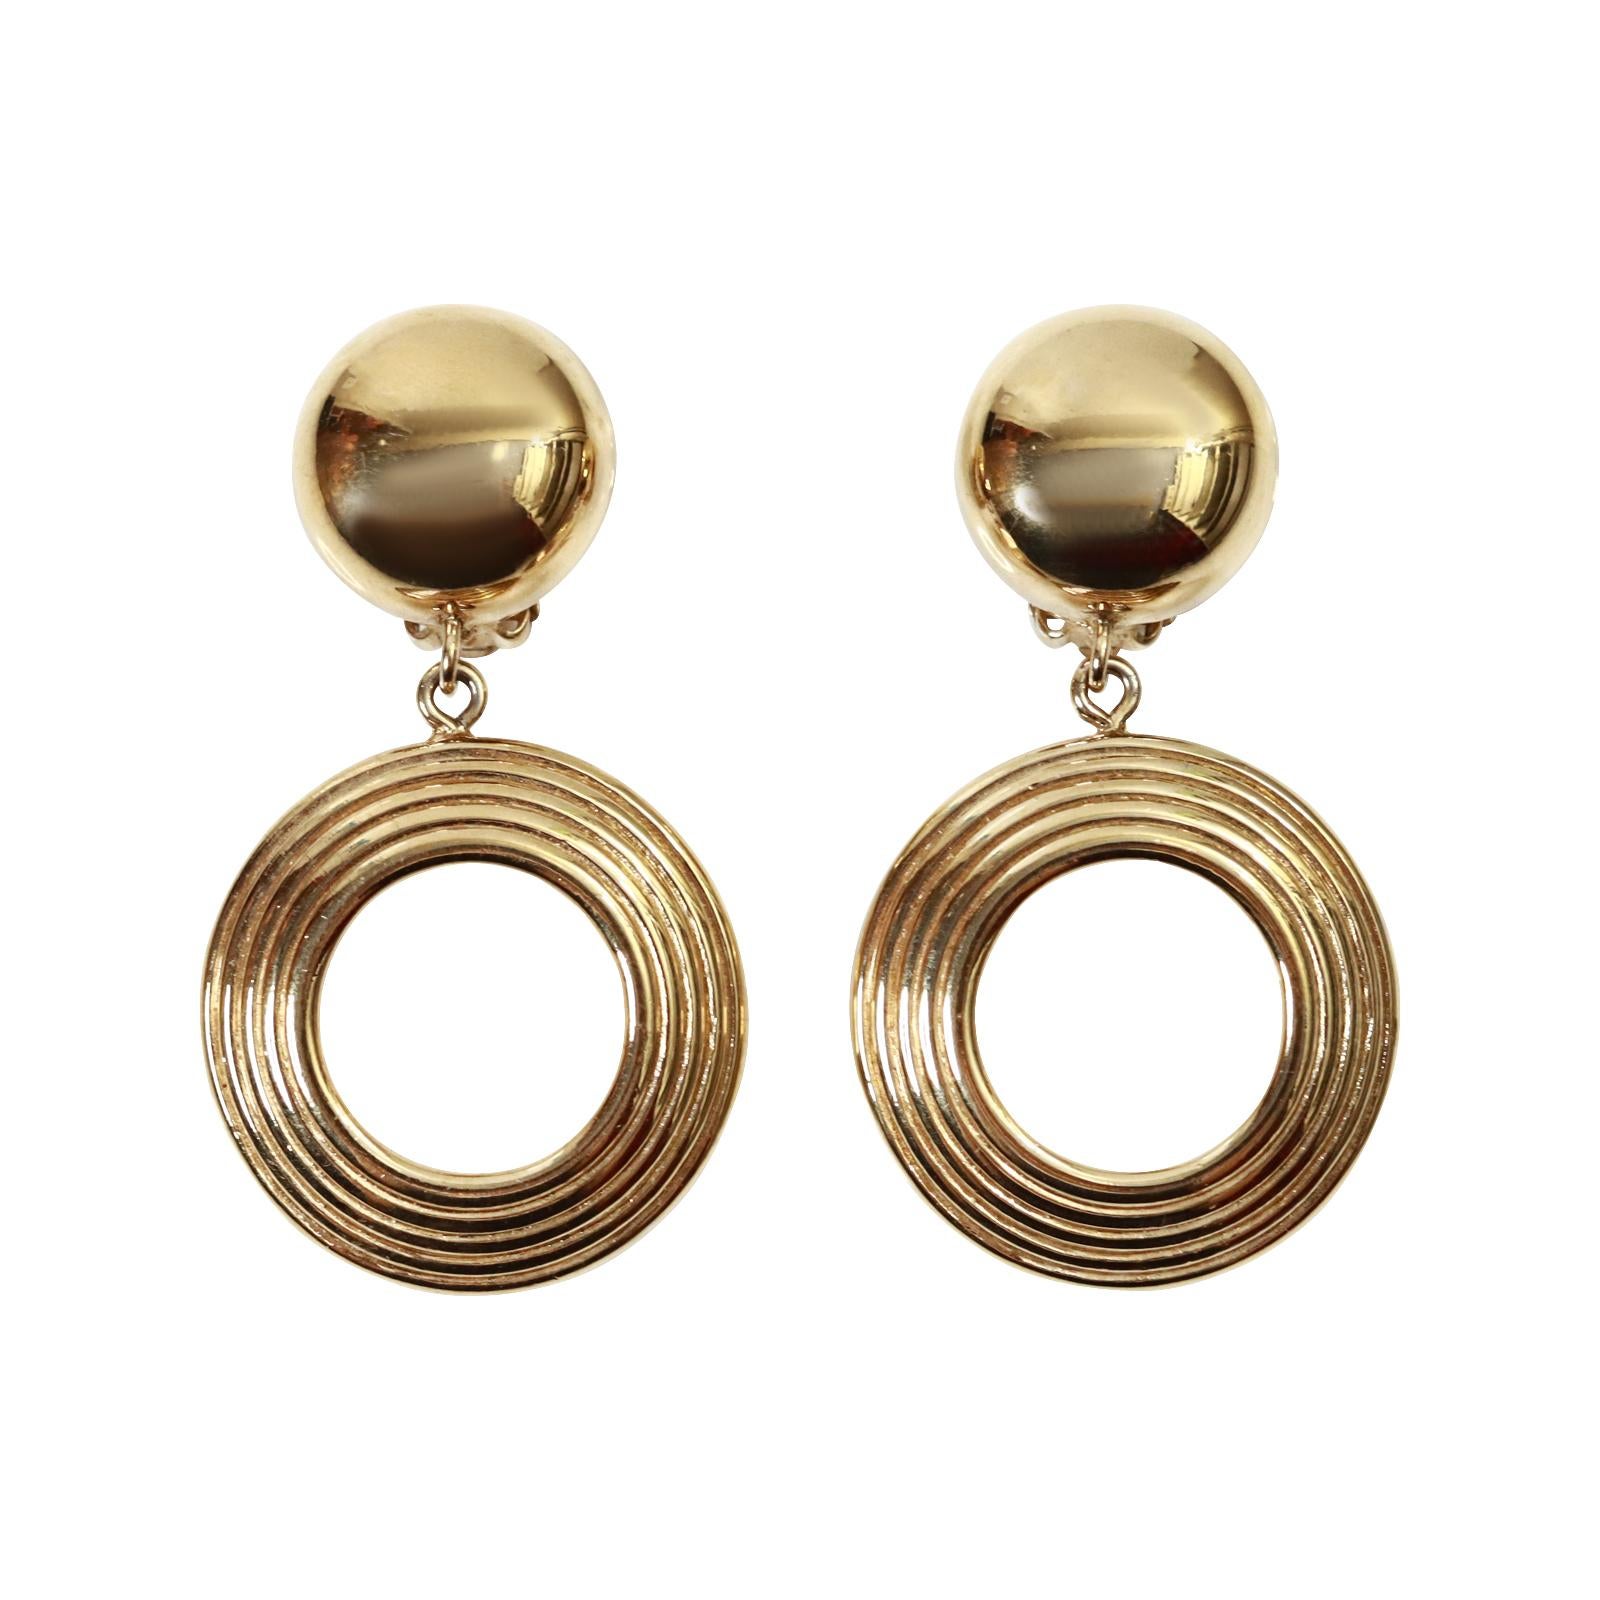 Vintage Givenchy Gold Tone Heavy Textured Front Facing Dangling Hoop Earrings.  Everyone needs a Classic Hoop like this in their wardrobe.  Spices up all your outfits. W. Clip on.

Now these are a great pair of dangling hoops!

